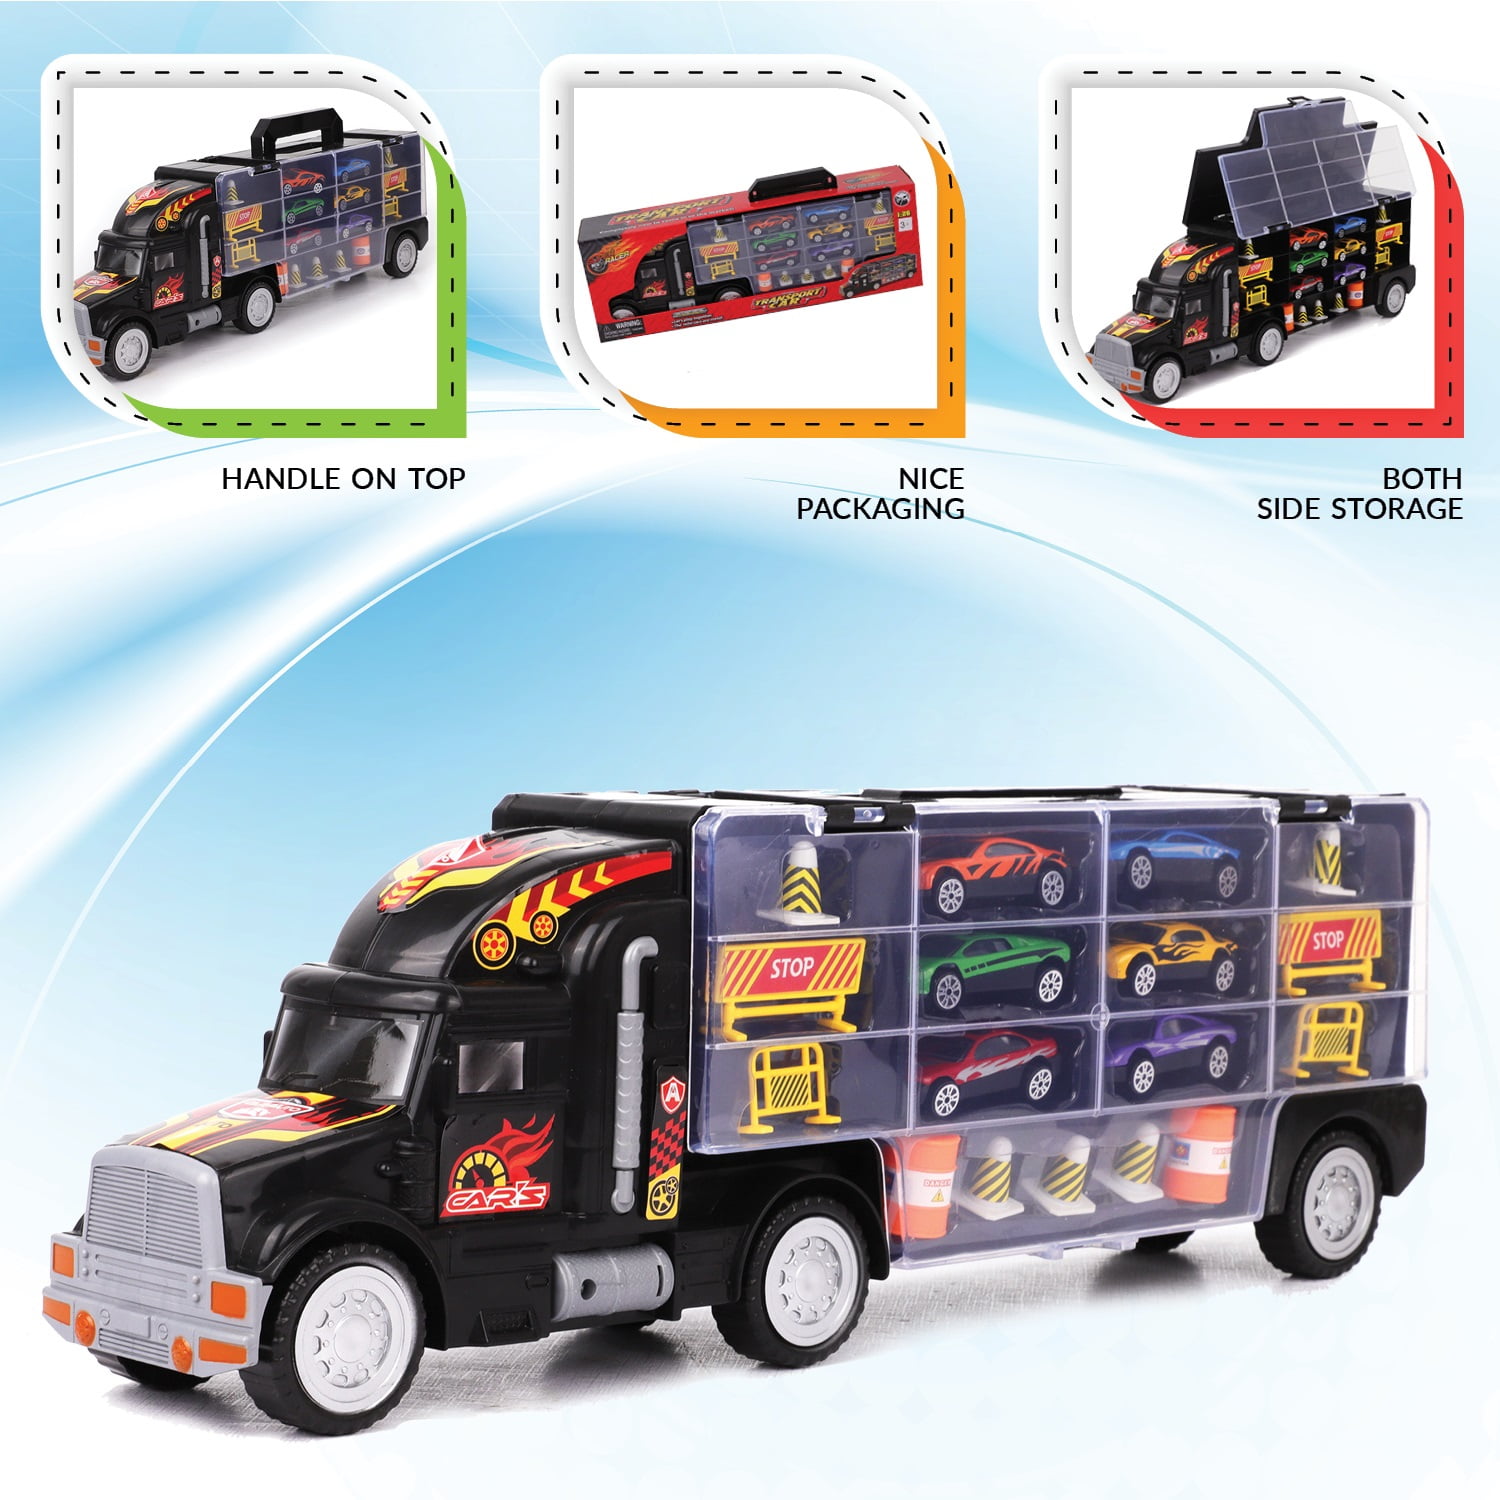 ToyVelt Transport Carrier Truck Toy for Boys Inside 1 Includes 6 Cars & Many Highway Accessories and 28, Additional Slots can be Used to Store hot Wheels, Matchbox Cars